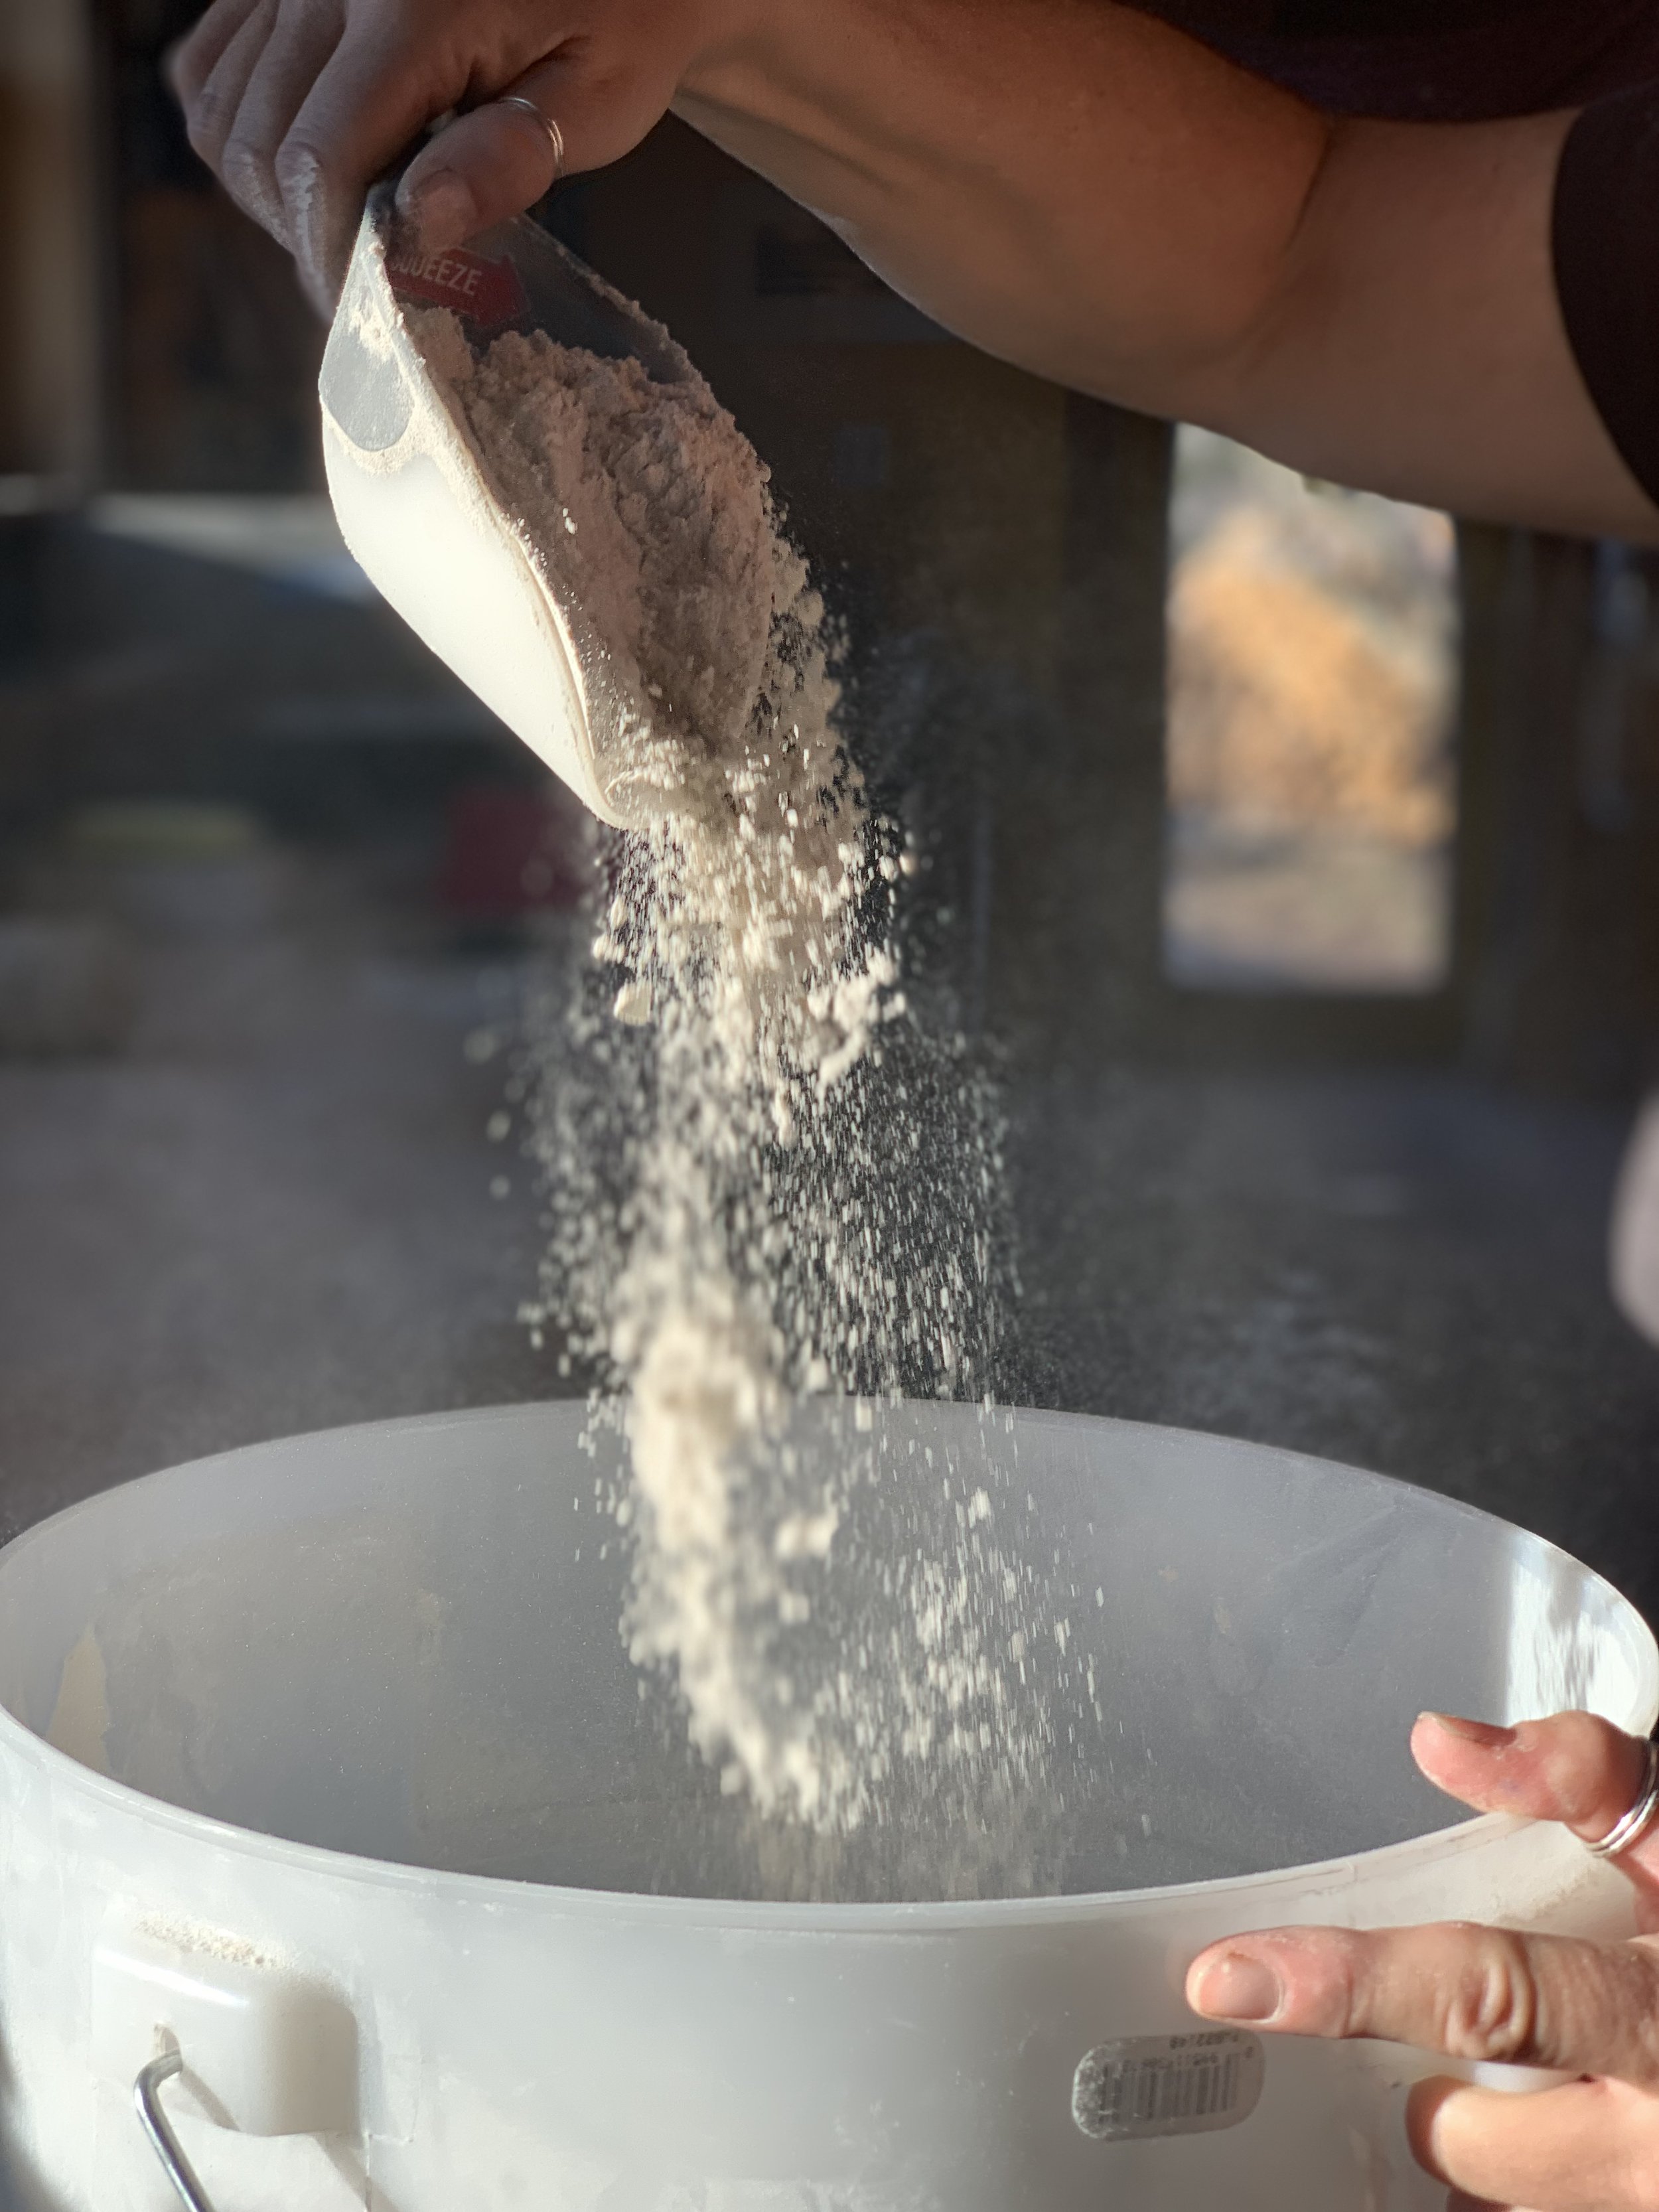 a scoop of grain going into a bucket